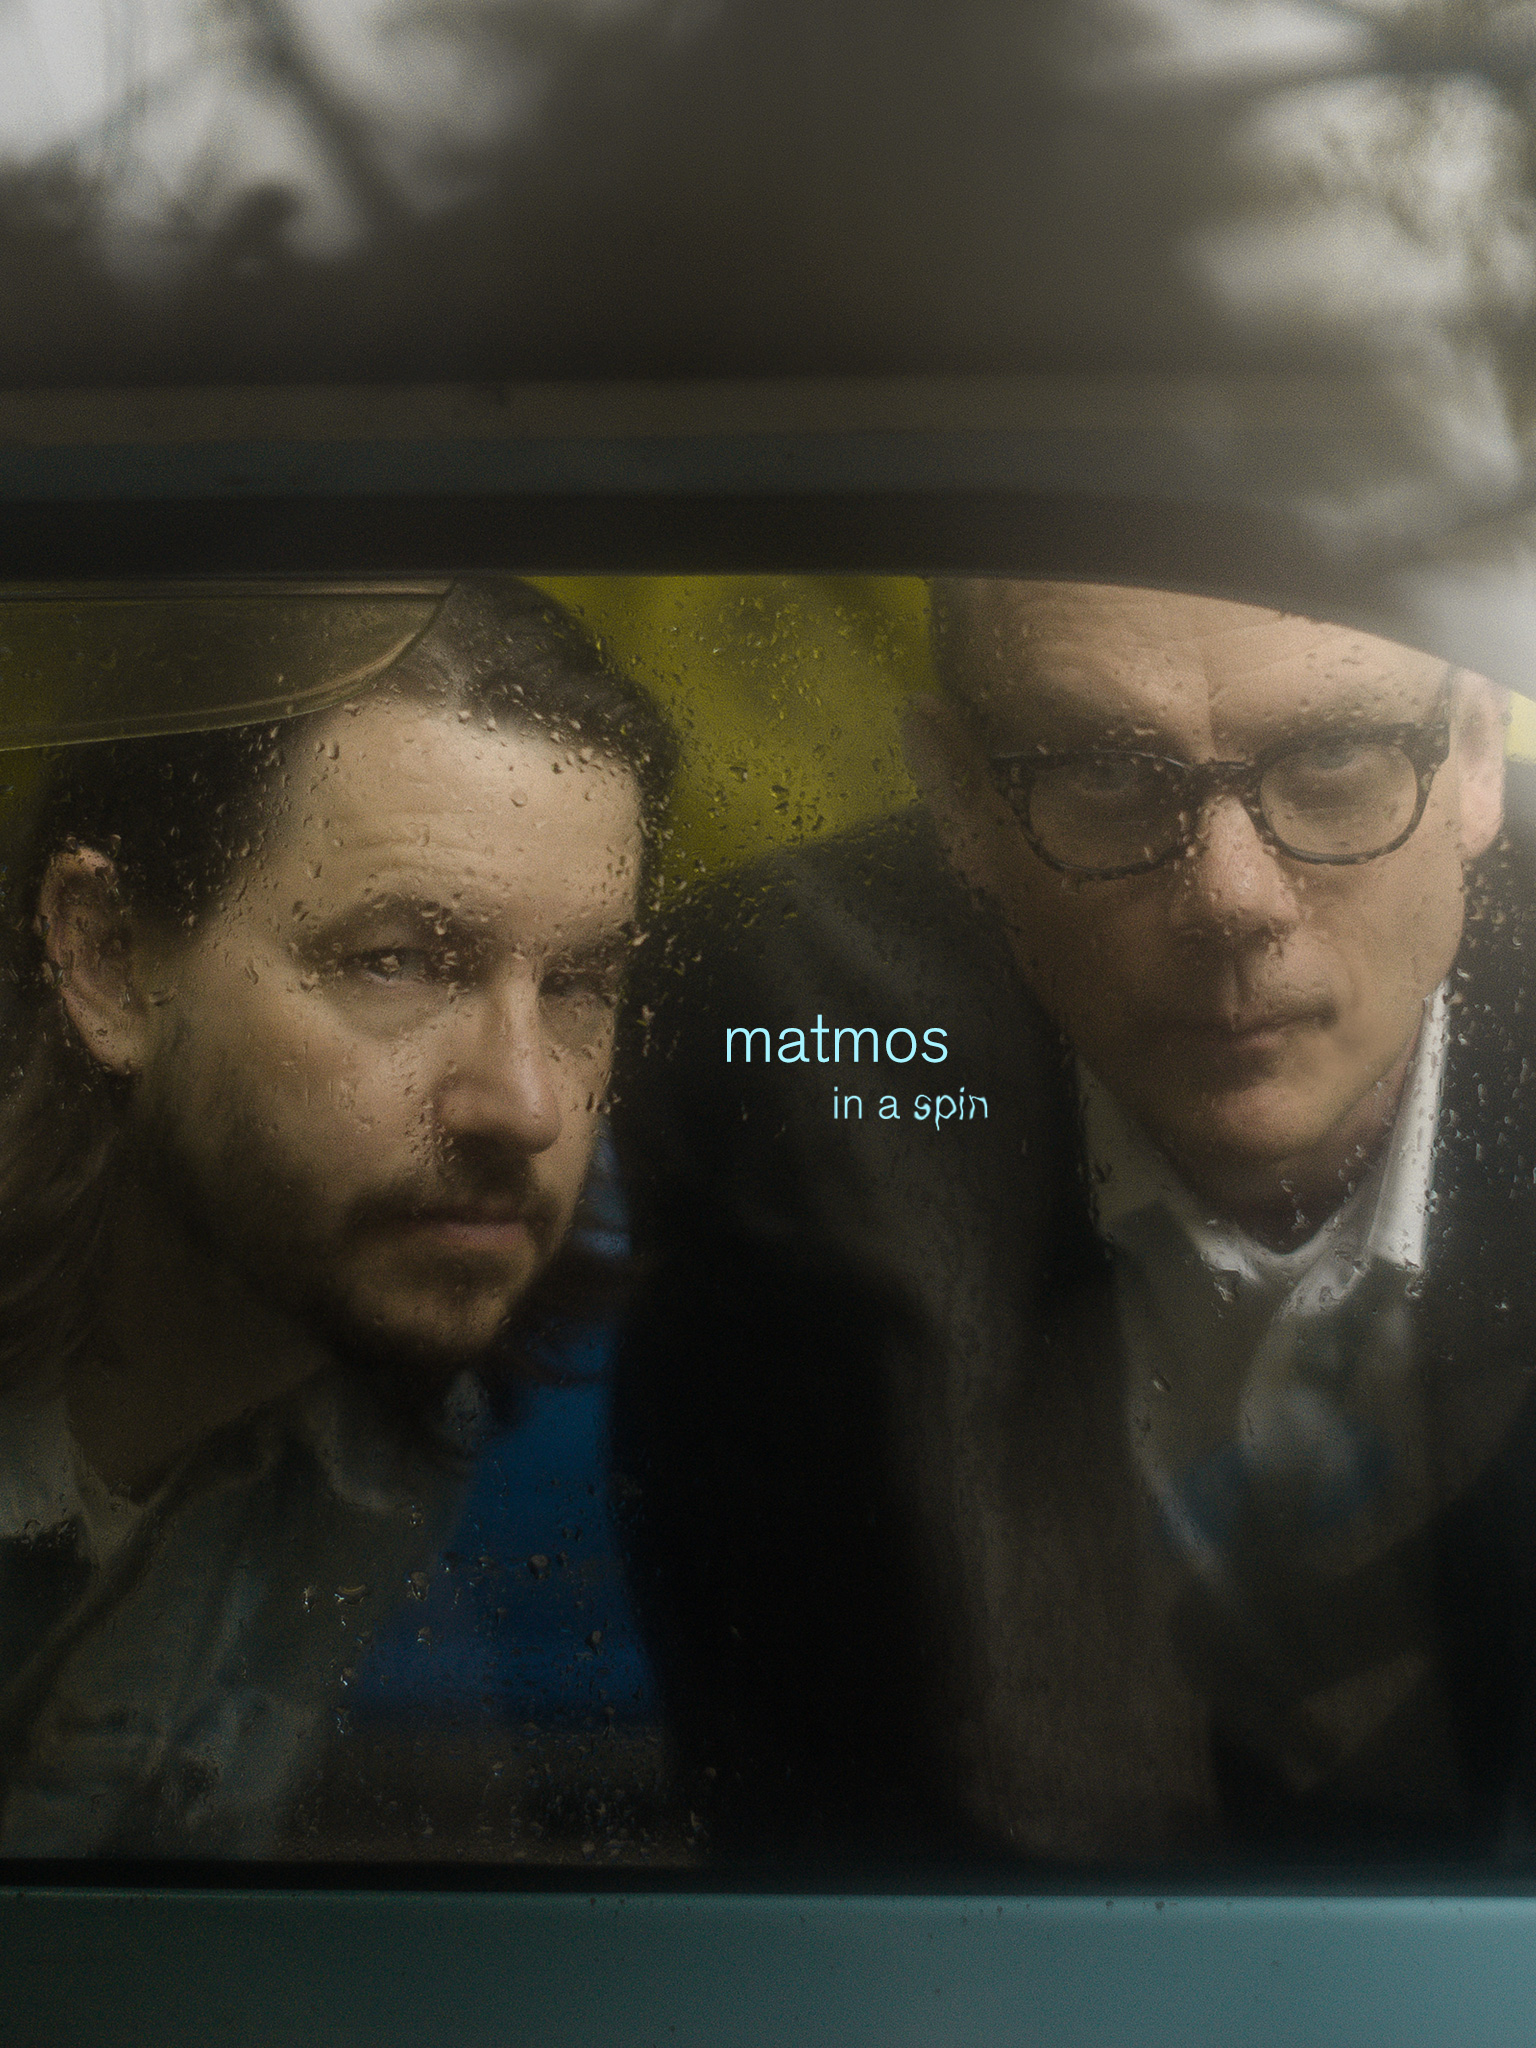 Matmos: In a spin